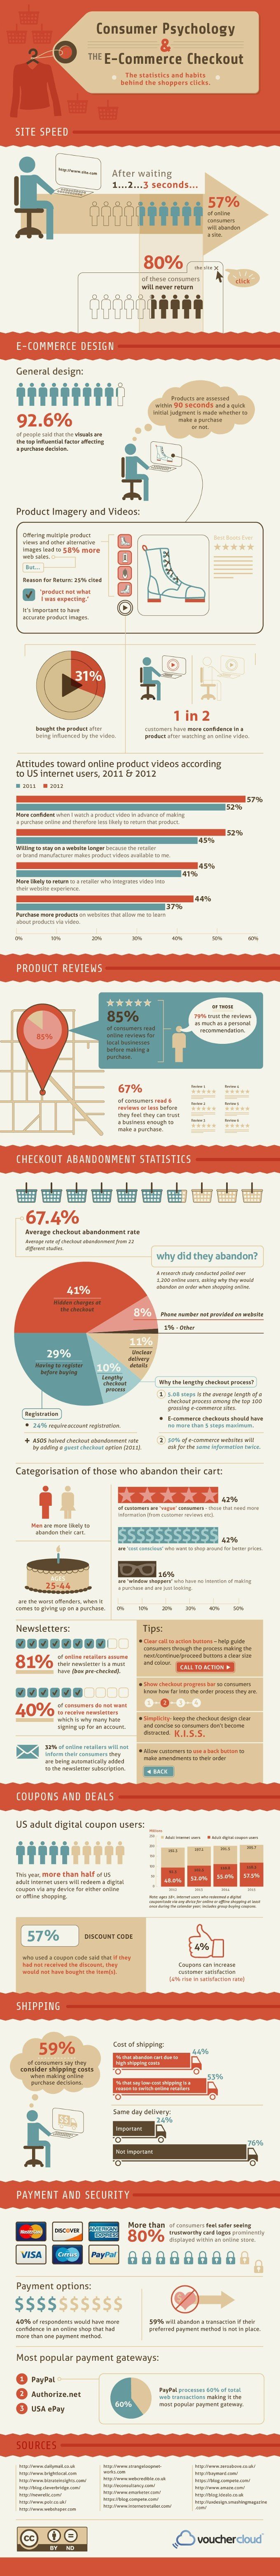 Consumer Psychology and ECommerce Checkouts Infographic 